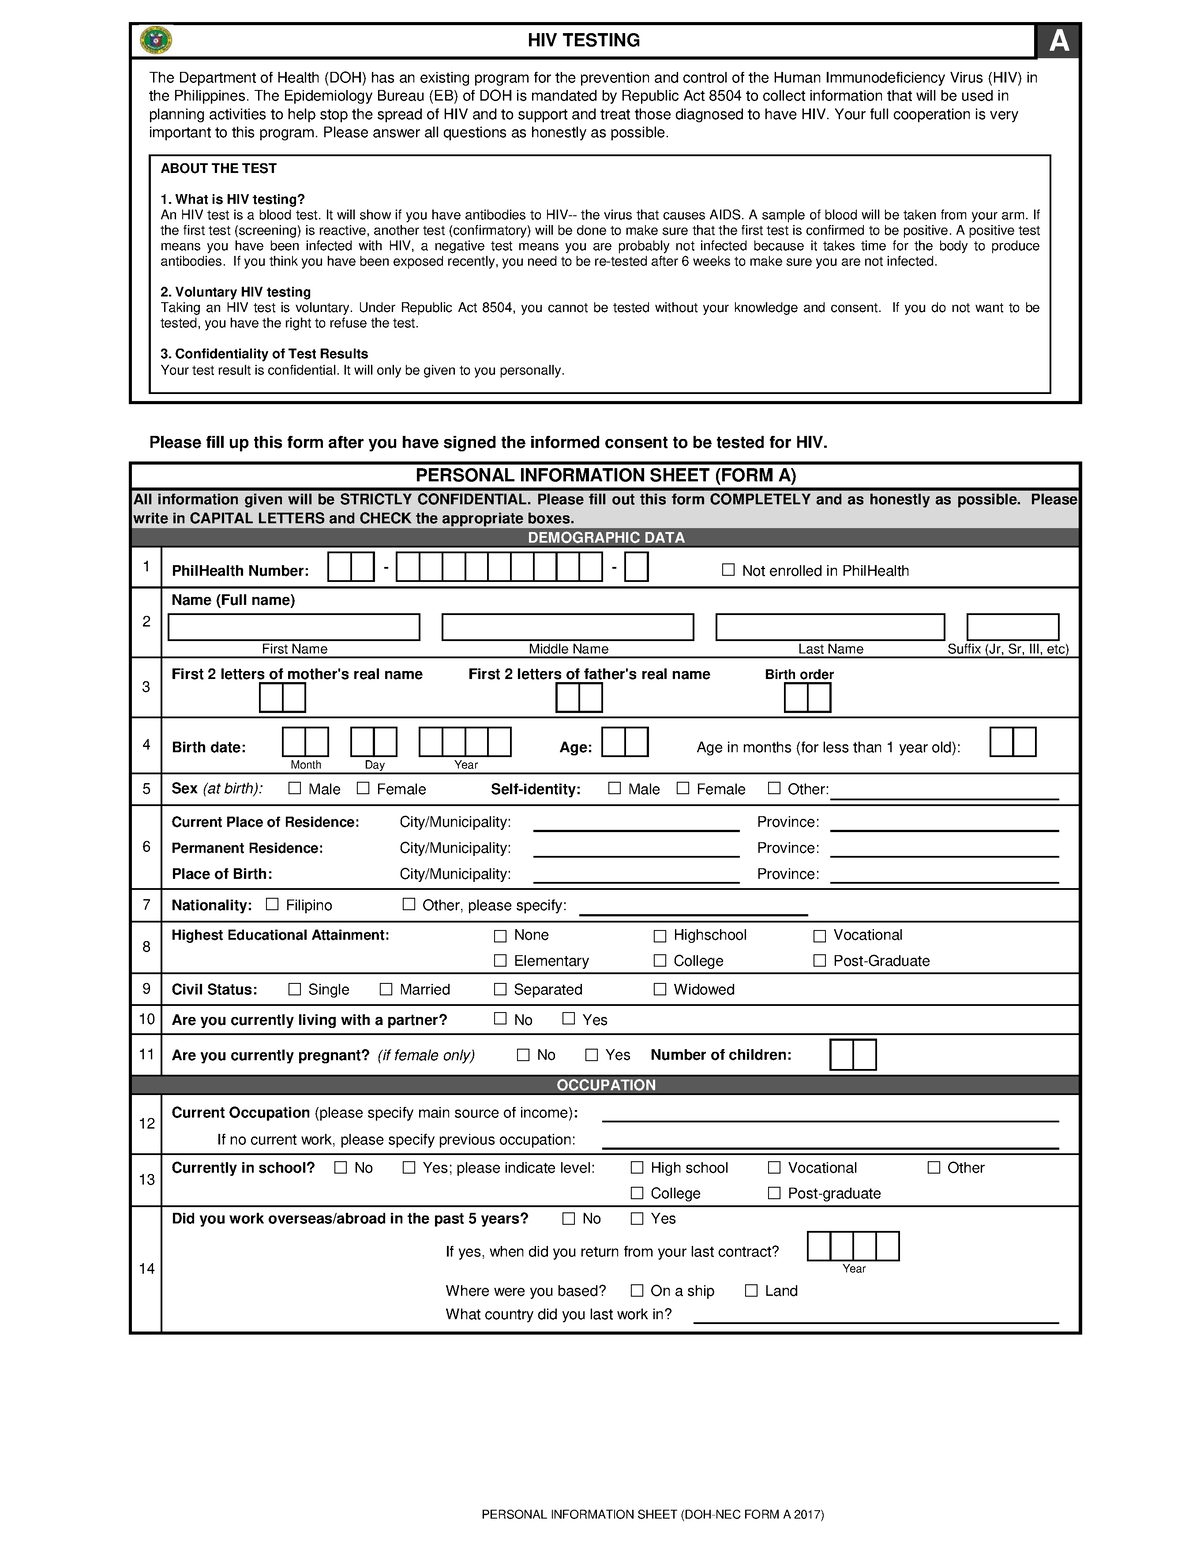 HIV Personal Information Sheet (2017 ) Please fill up this form after